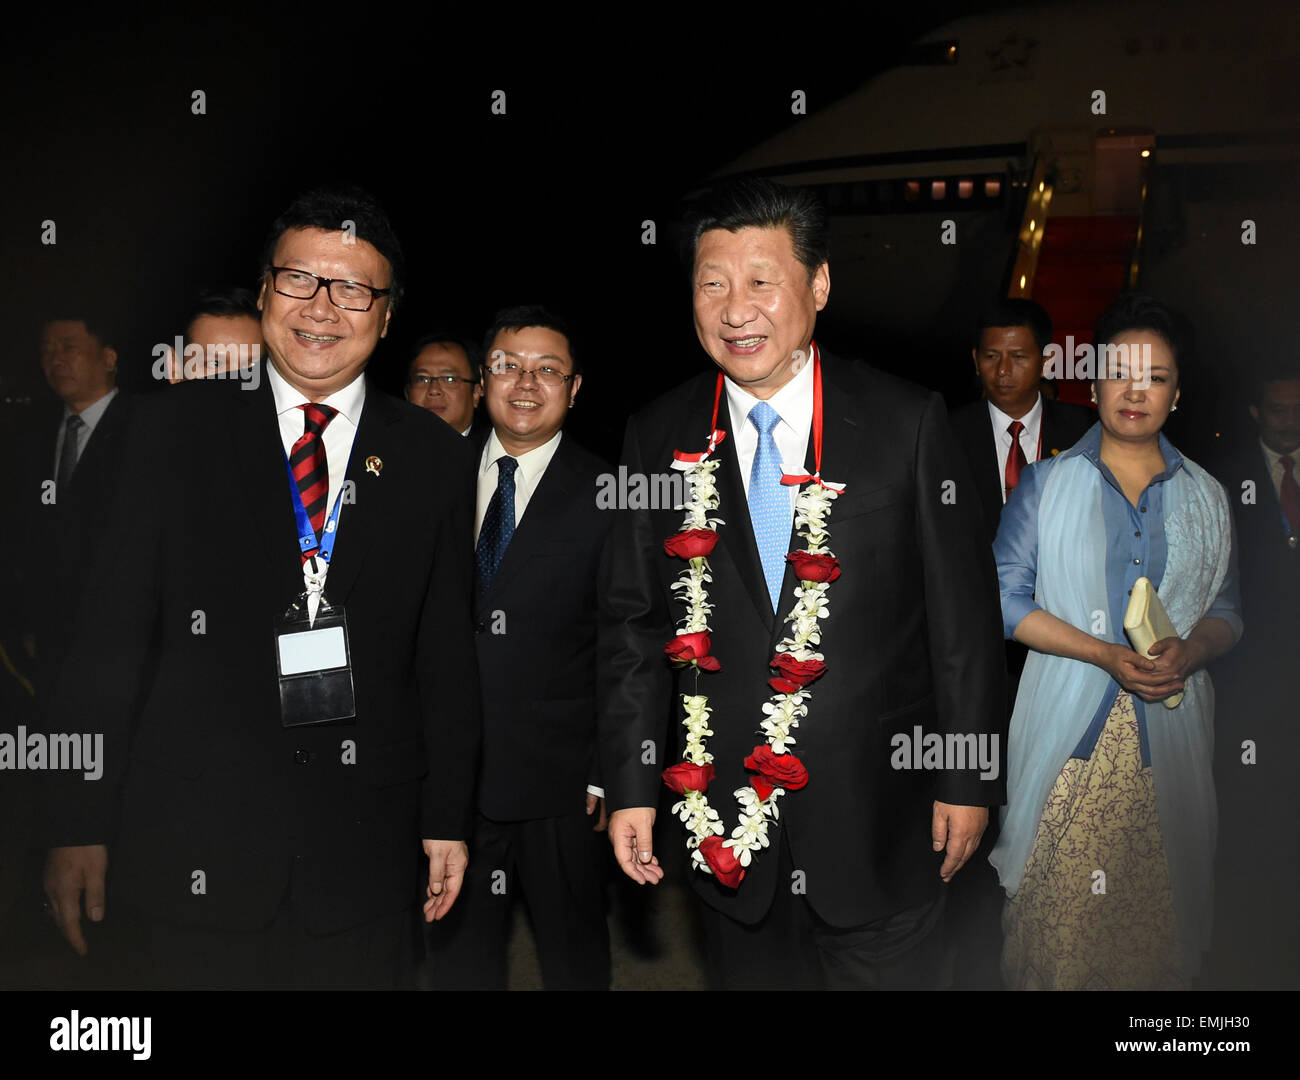 Jakarta, Indonesia. 21st Apr, 2015. Chinese President Xi Jinping and his wife Peng Liyuan are welcomed upon their arrival in Jakarta, capital of Indonesia, April 21, 2015. Xi Jinping arrived in Indonesia late Tuesday for an Asian-African summit and commemorative activities for the historic 1955 Bandung Conference. © Li Xueren/Xinhua/Alamy Live News Stock Photo